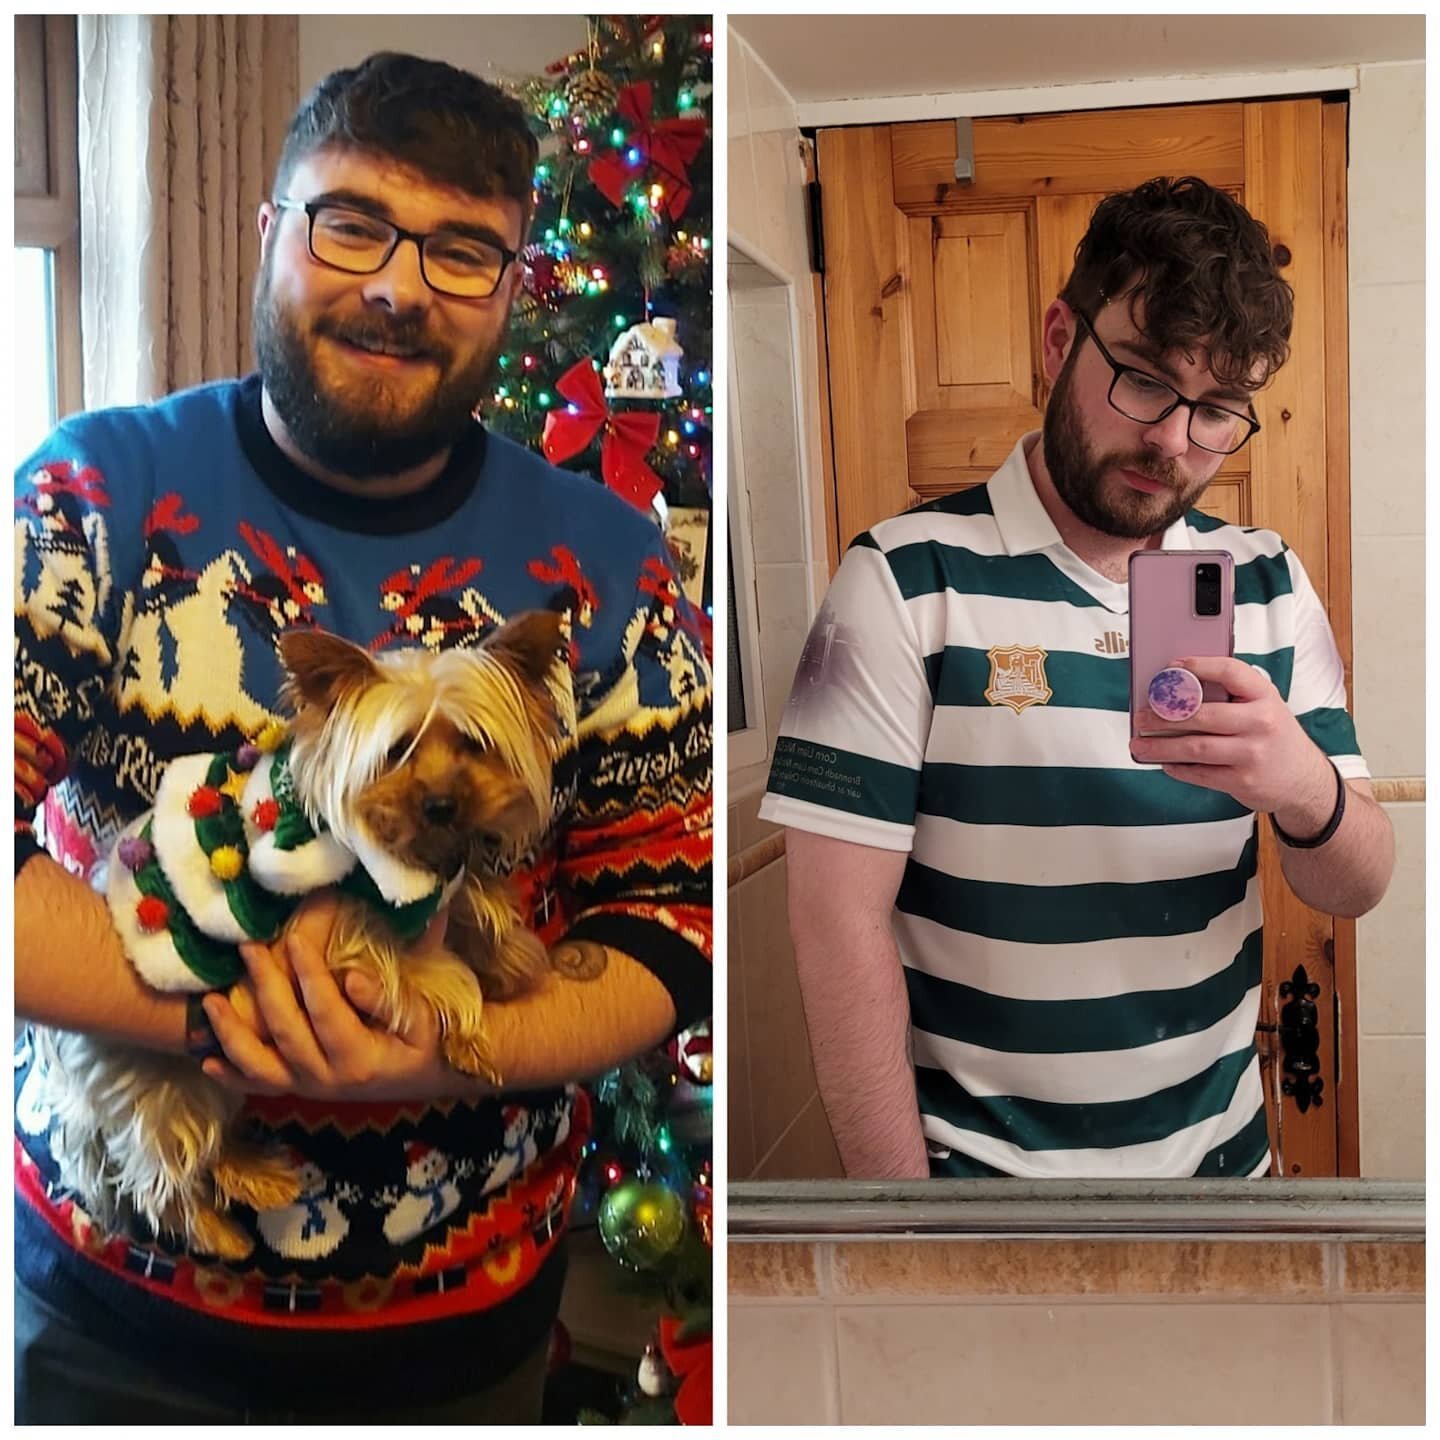 January 4th: 106kg&nbsp; April 28th: 91kg 

I really didn't think I'd ever be sharing something like this. 

In January 2021 after a New Year's Day hangover, I decided to make a change. I'd spent months on end seeing friends posting home gym sessions